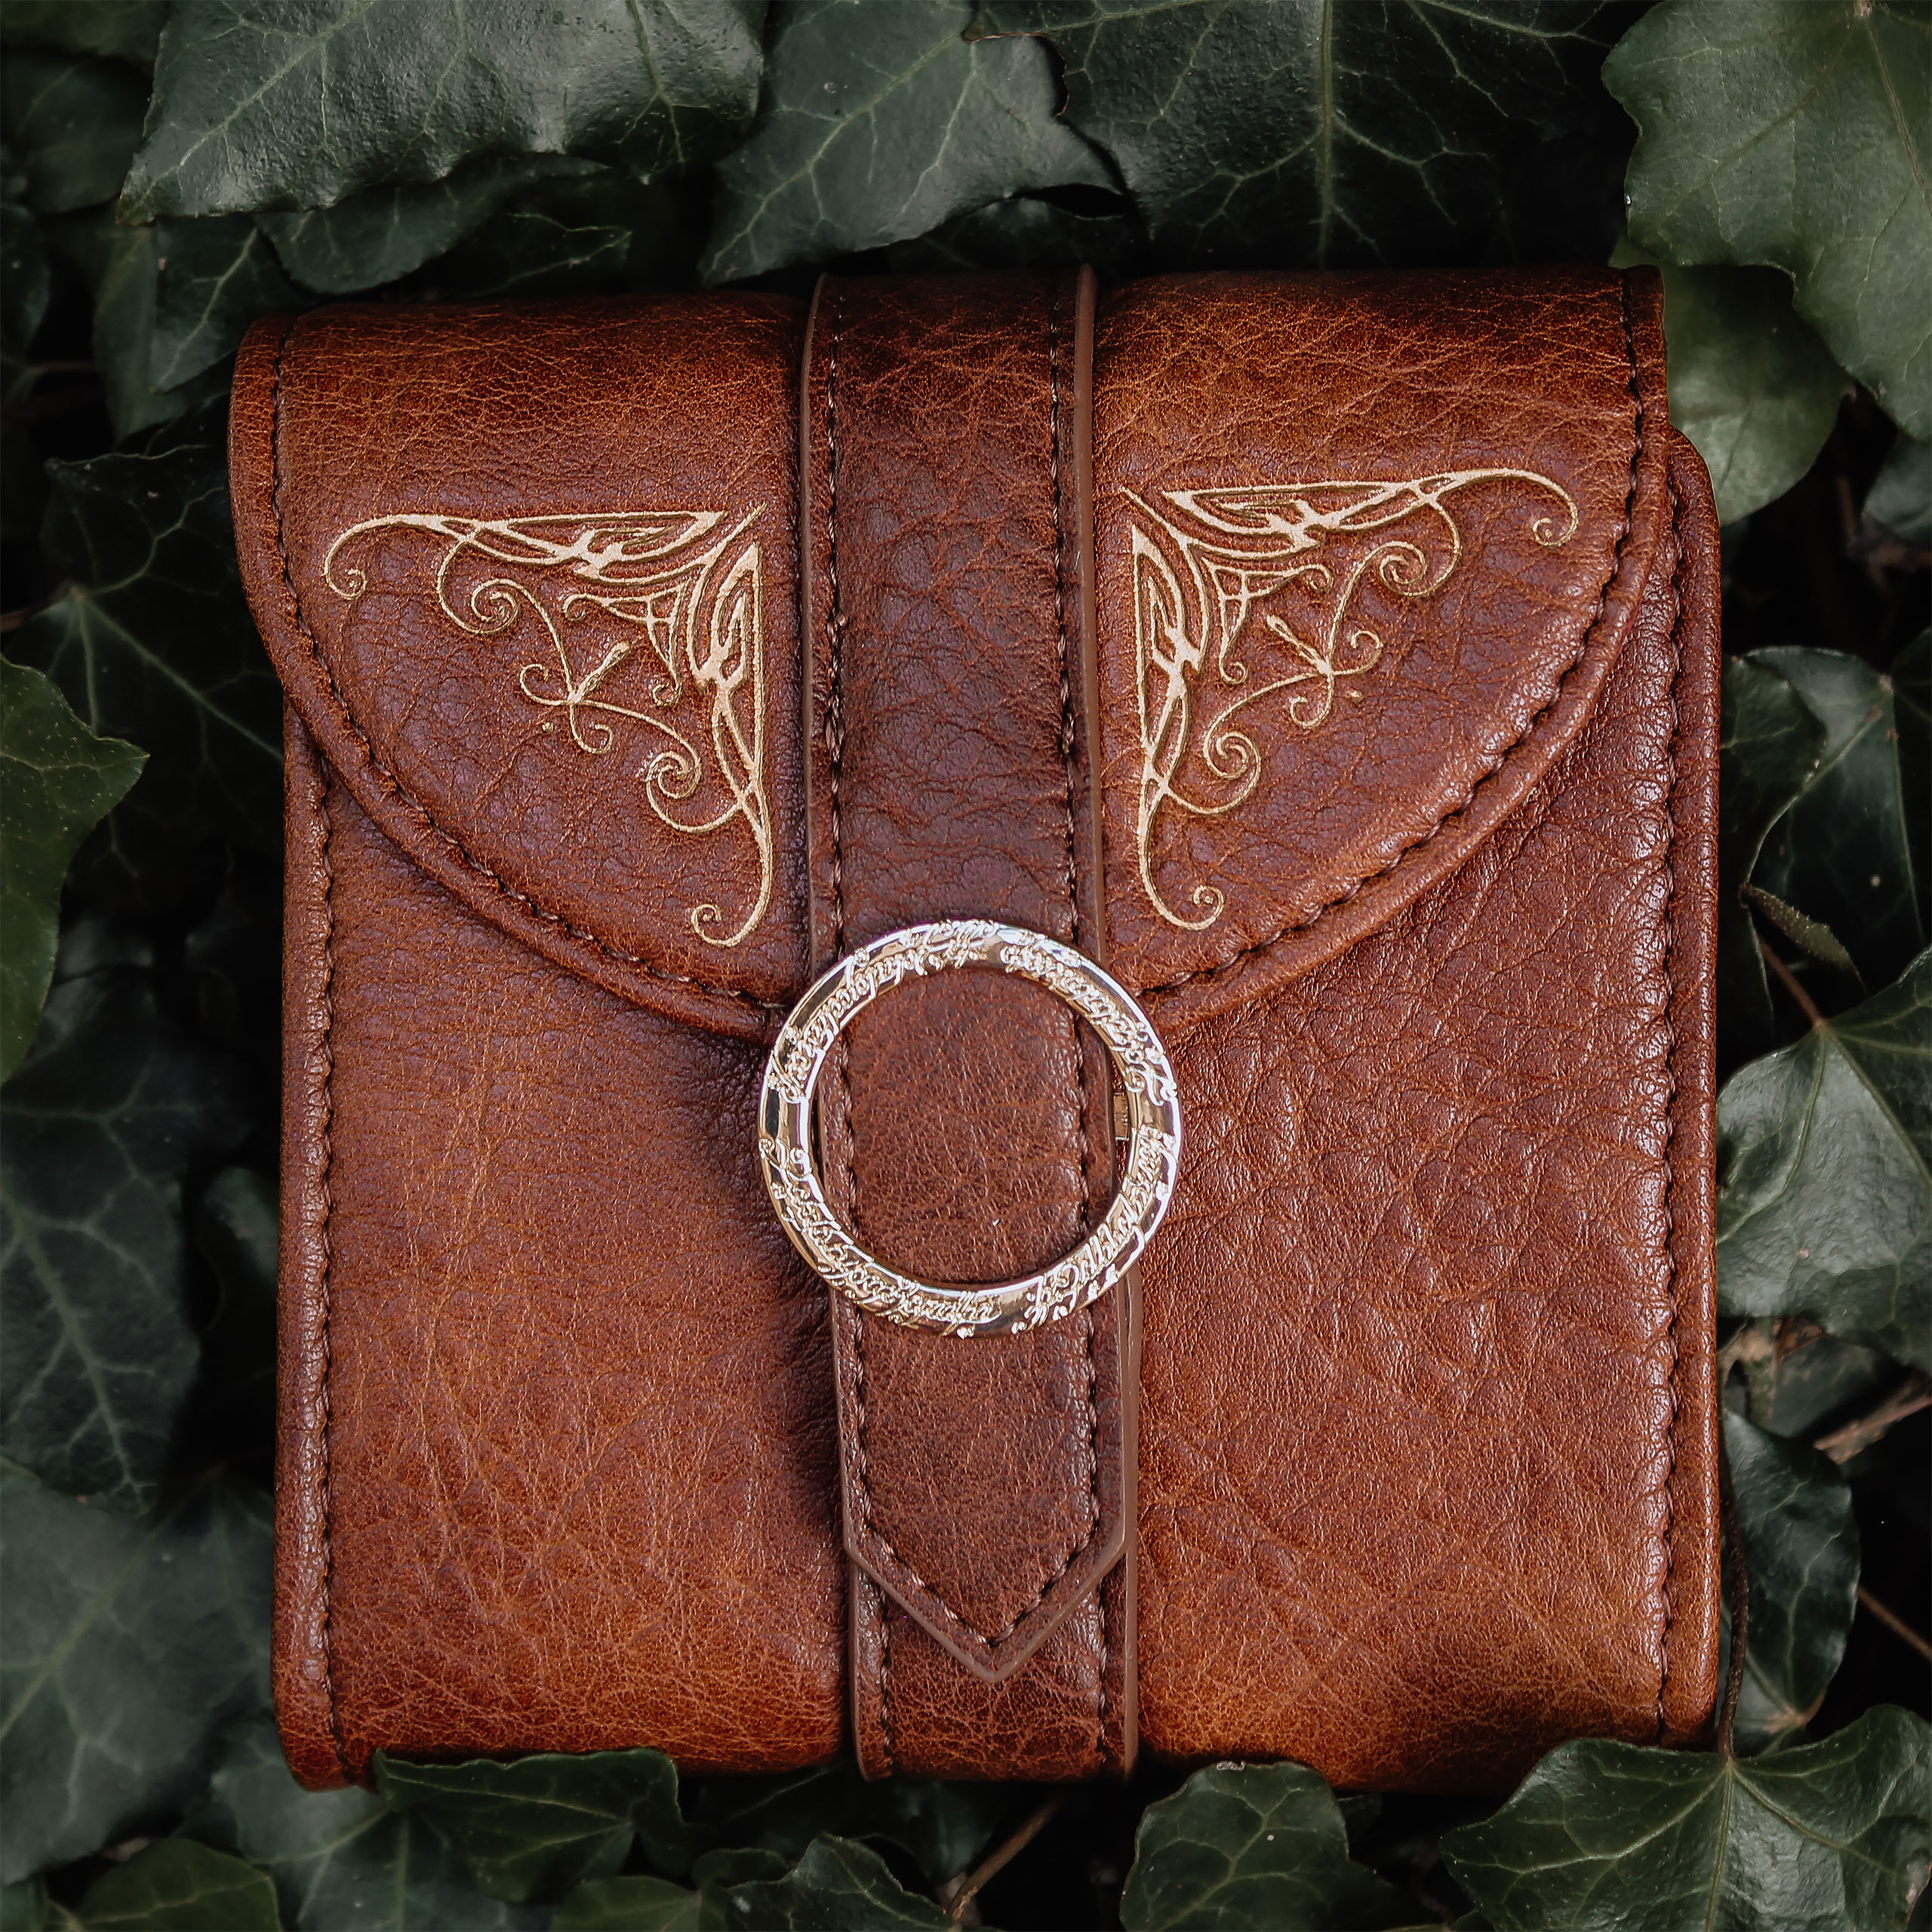 Lord of the Rings - The One Ring Wallet with Belt Loop